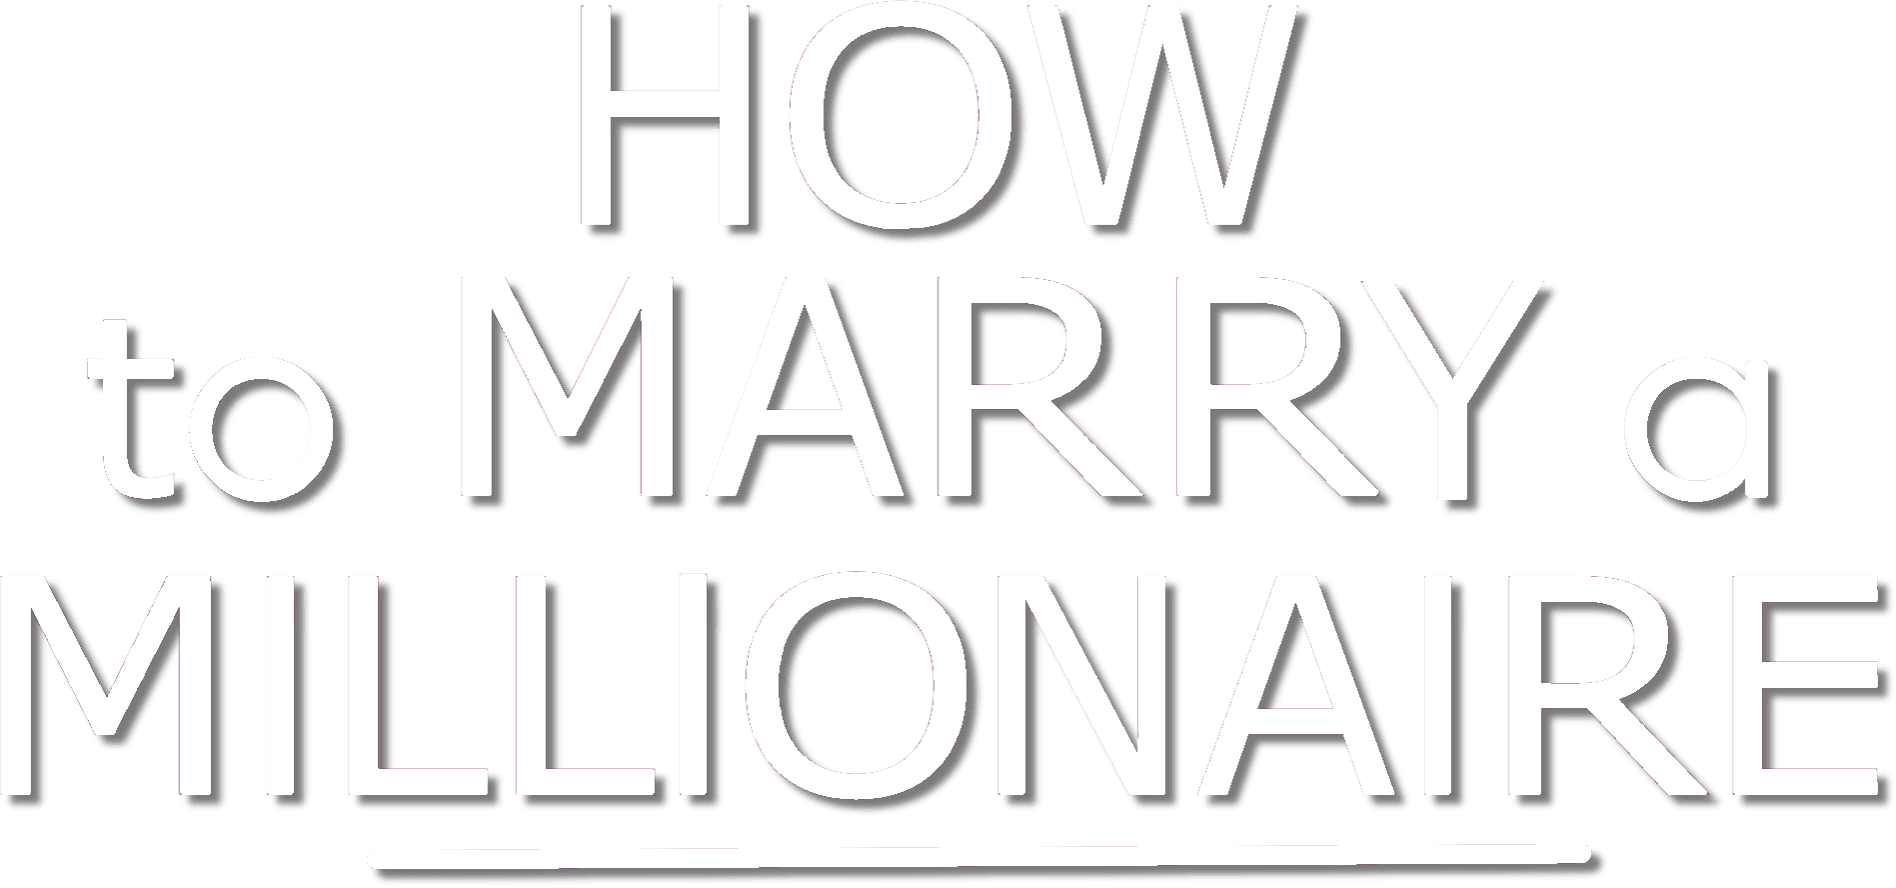 How to Marry a Millionaire logo